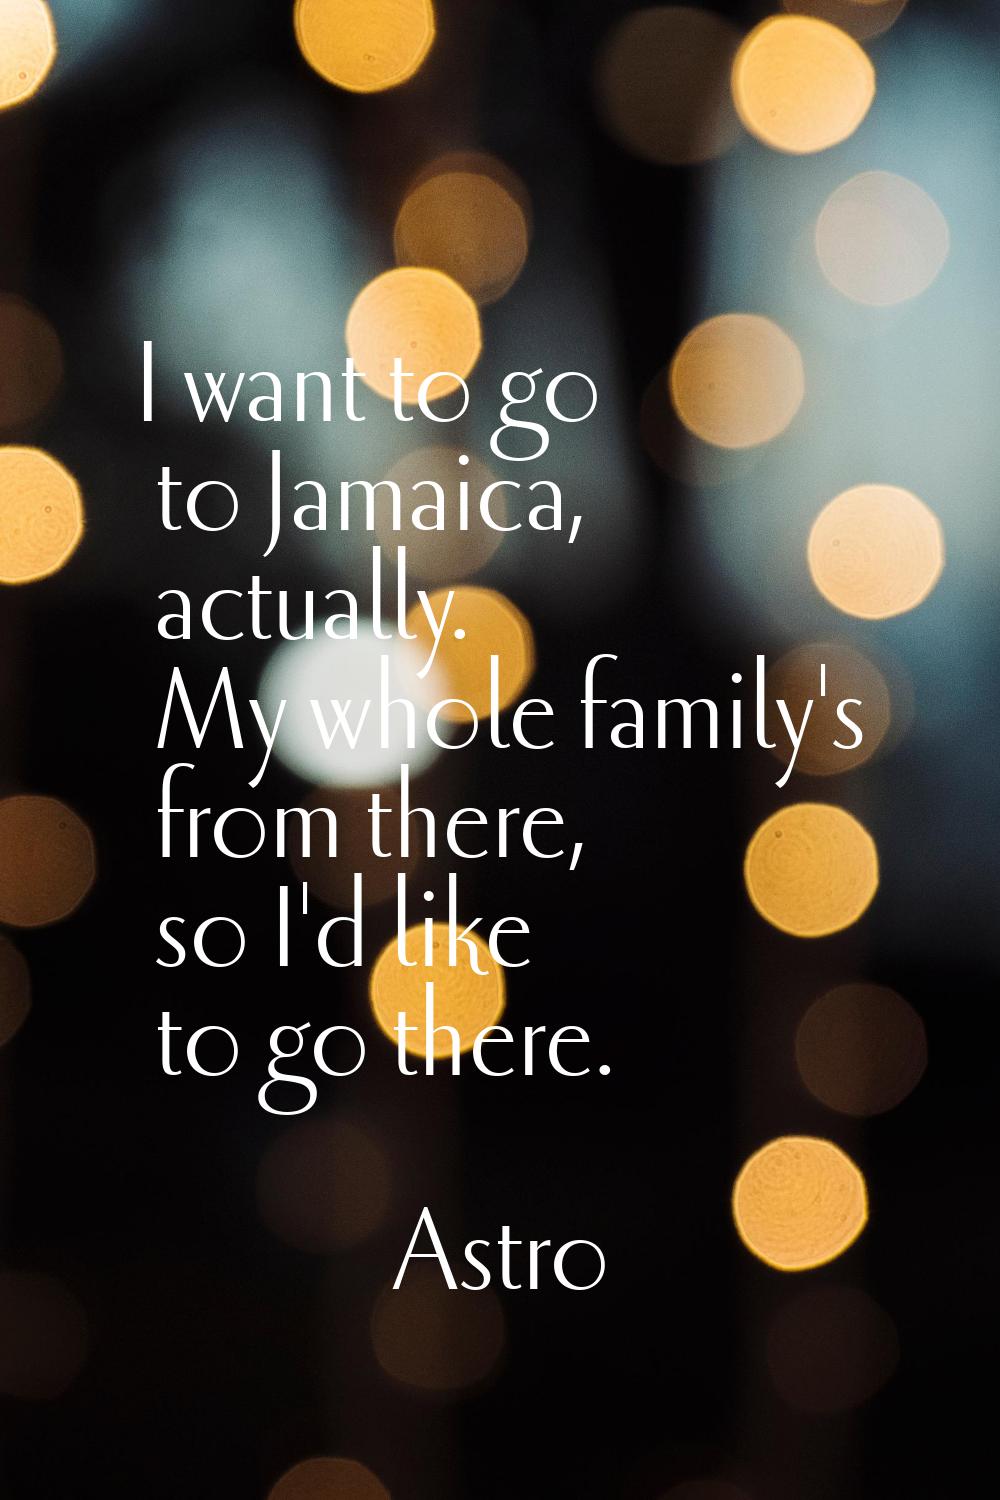 I want to go to Jamaica, actually. My whole family's from there, so I'd like to go there.